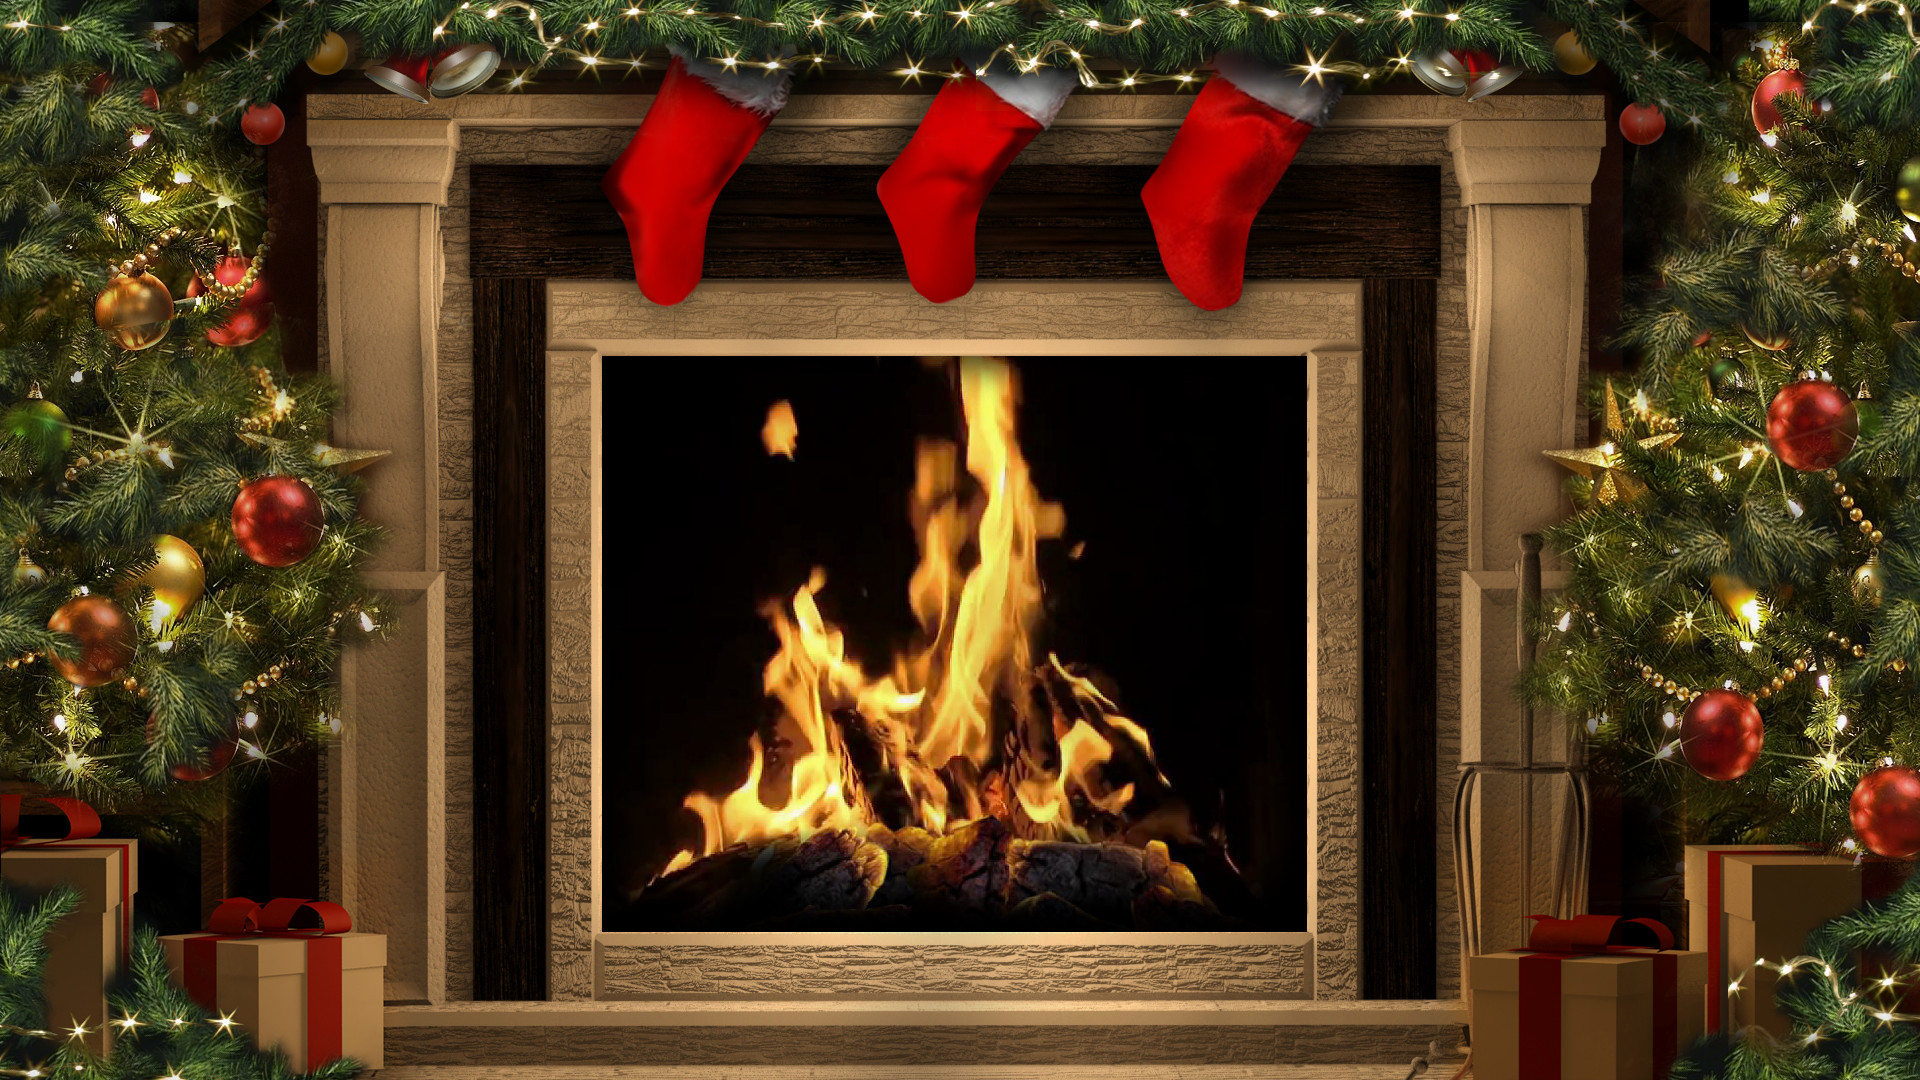 Christmas Fireplace Photo
 Amazing Christmas Fireplaces App Ranking and Store Data